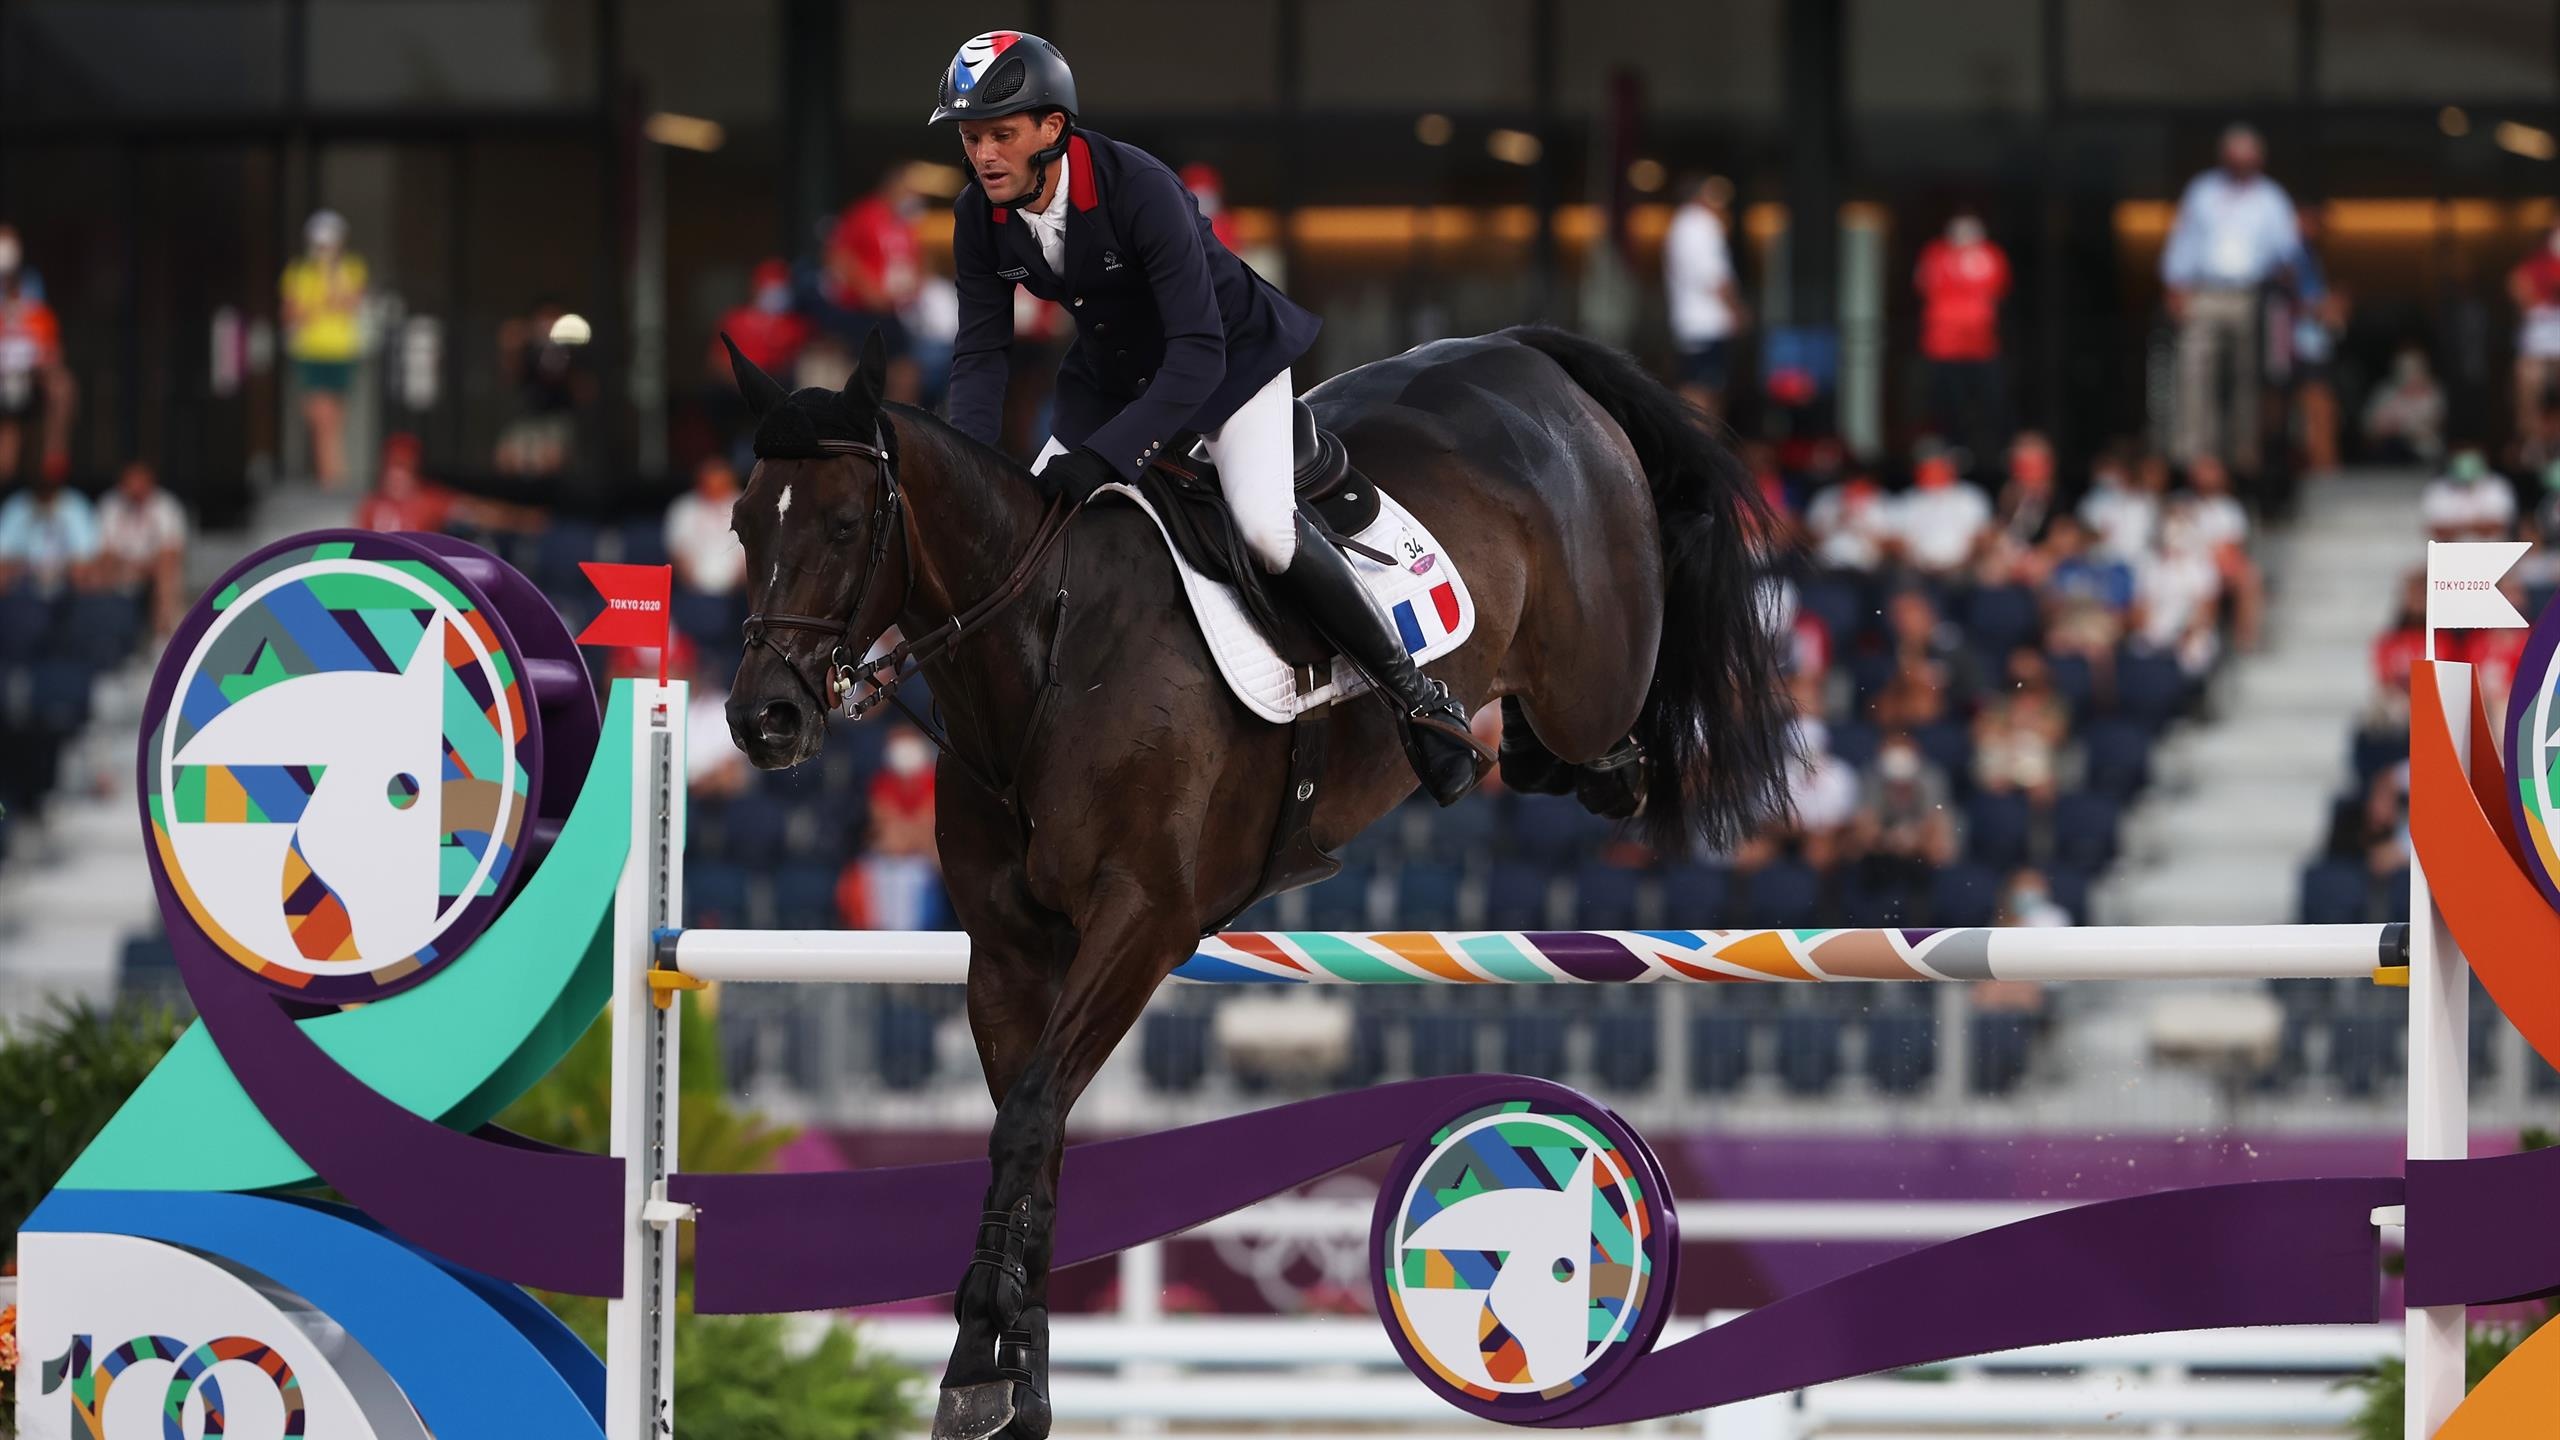 Eventing: Nicolas Touzaint at the 2020 Tokyo Summer Olympics, A French professional horserider. 2560x1440 HD Wallpaper.